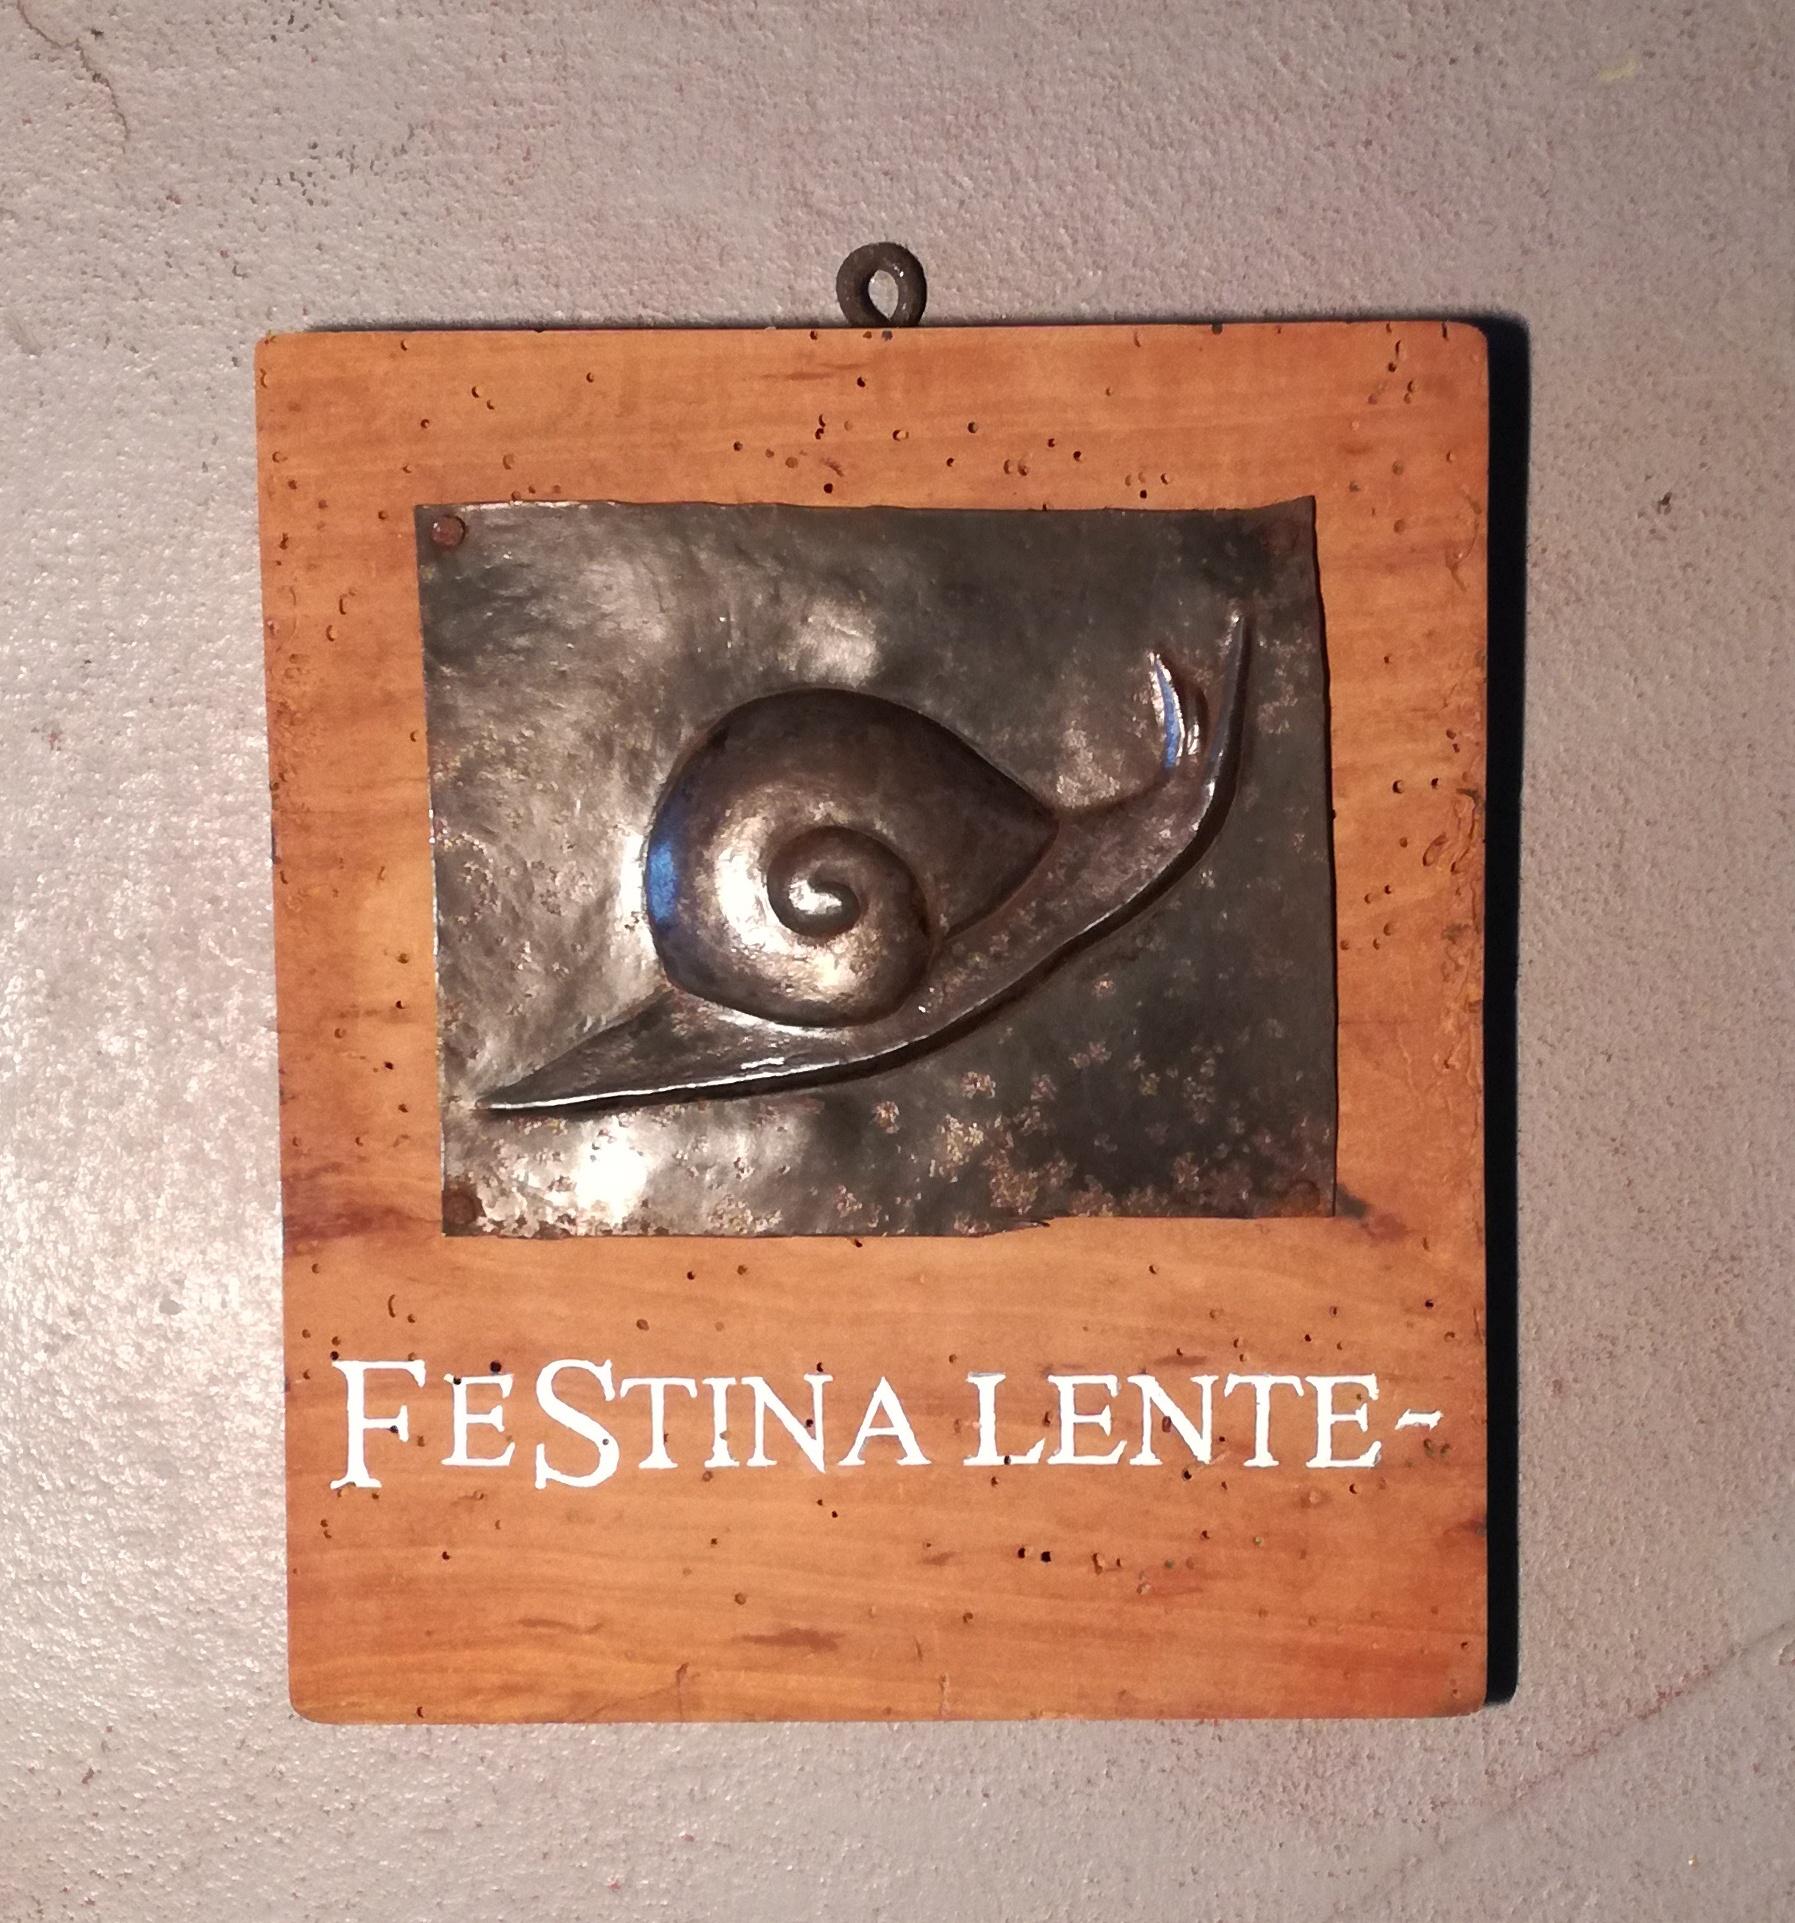 Festina Lente, antique hostaria sign. heavy metal plate with relief figure, mounted on solid wood panel. many woodworm marks are present. woodworm treatment has been done. writing is more recent.
Festìna lente 